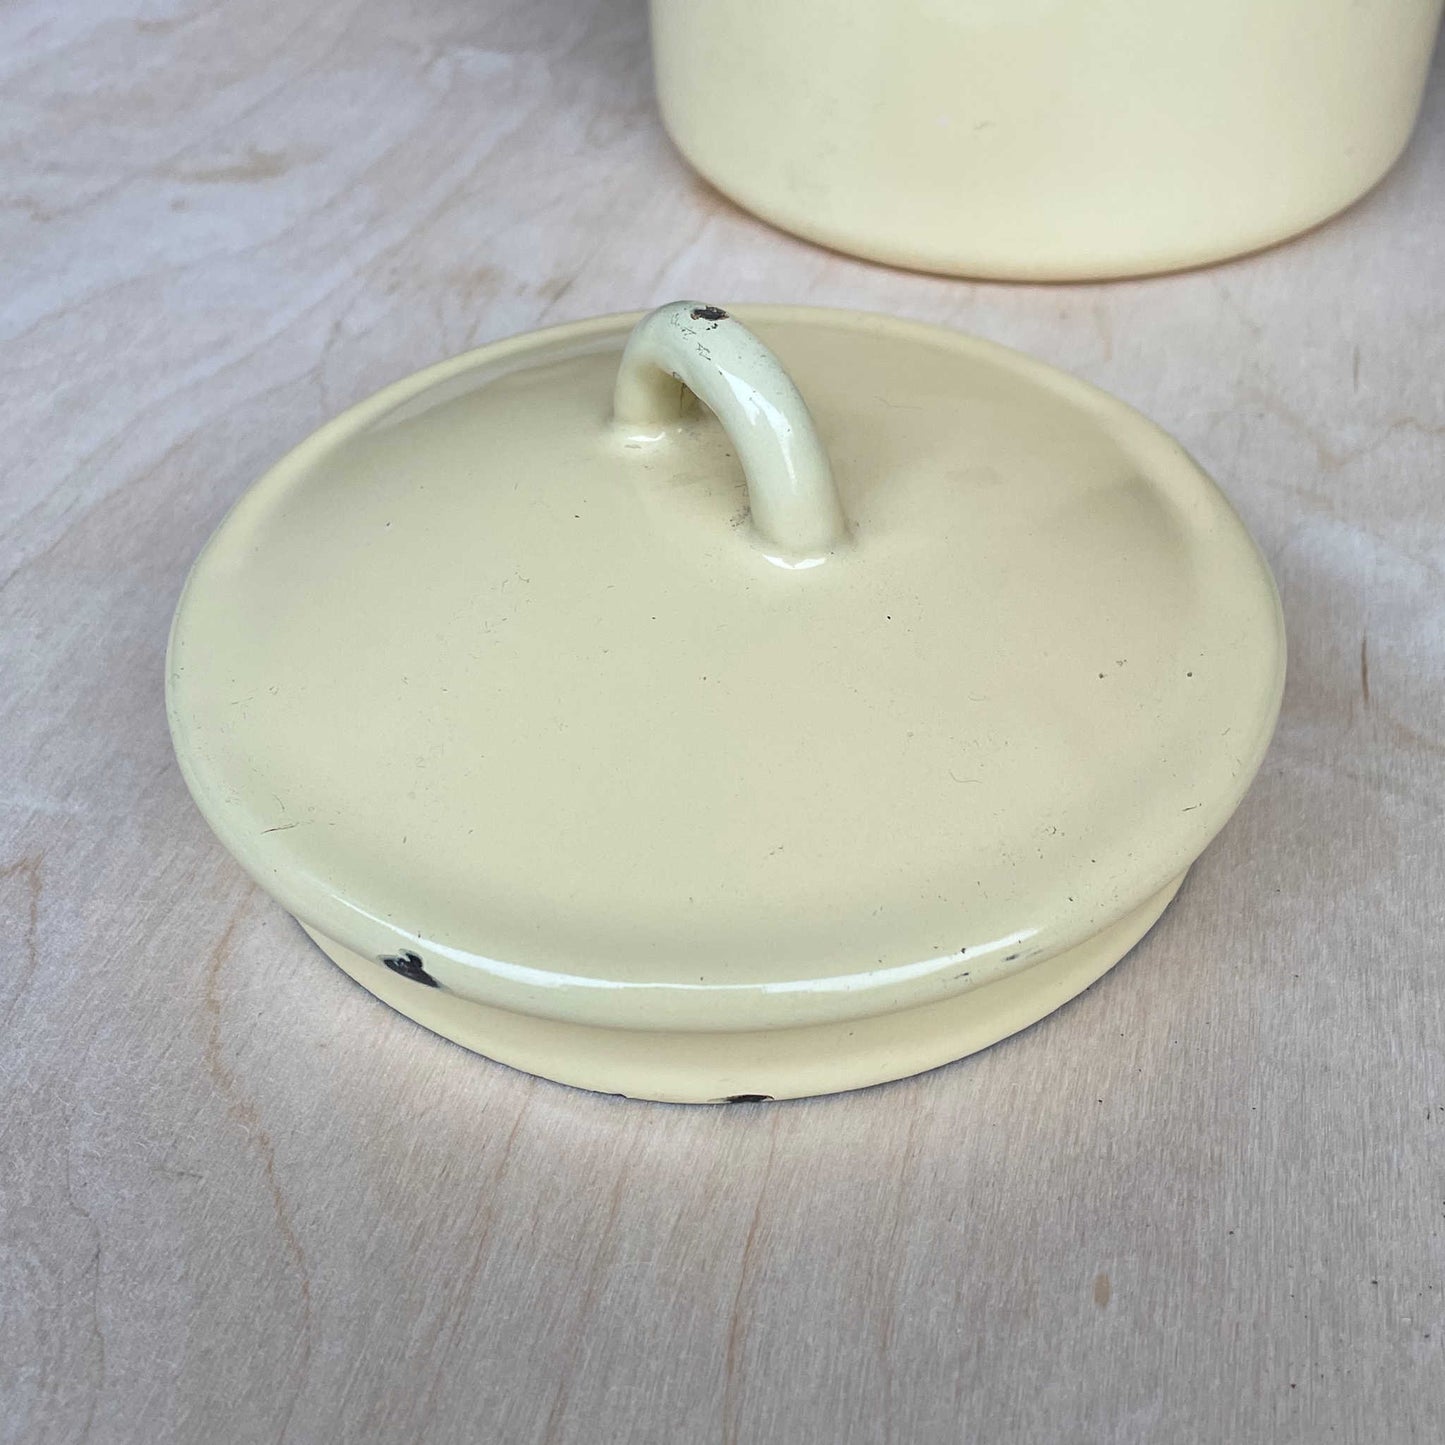 Cream enamelled churn container with lid.